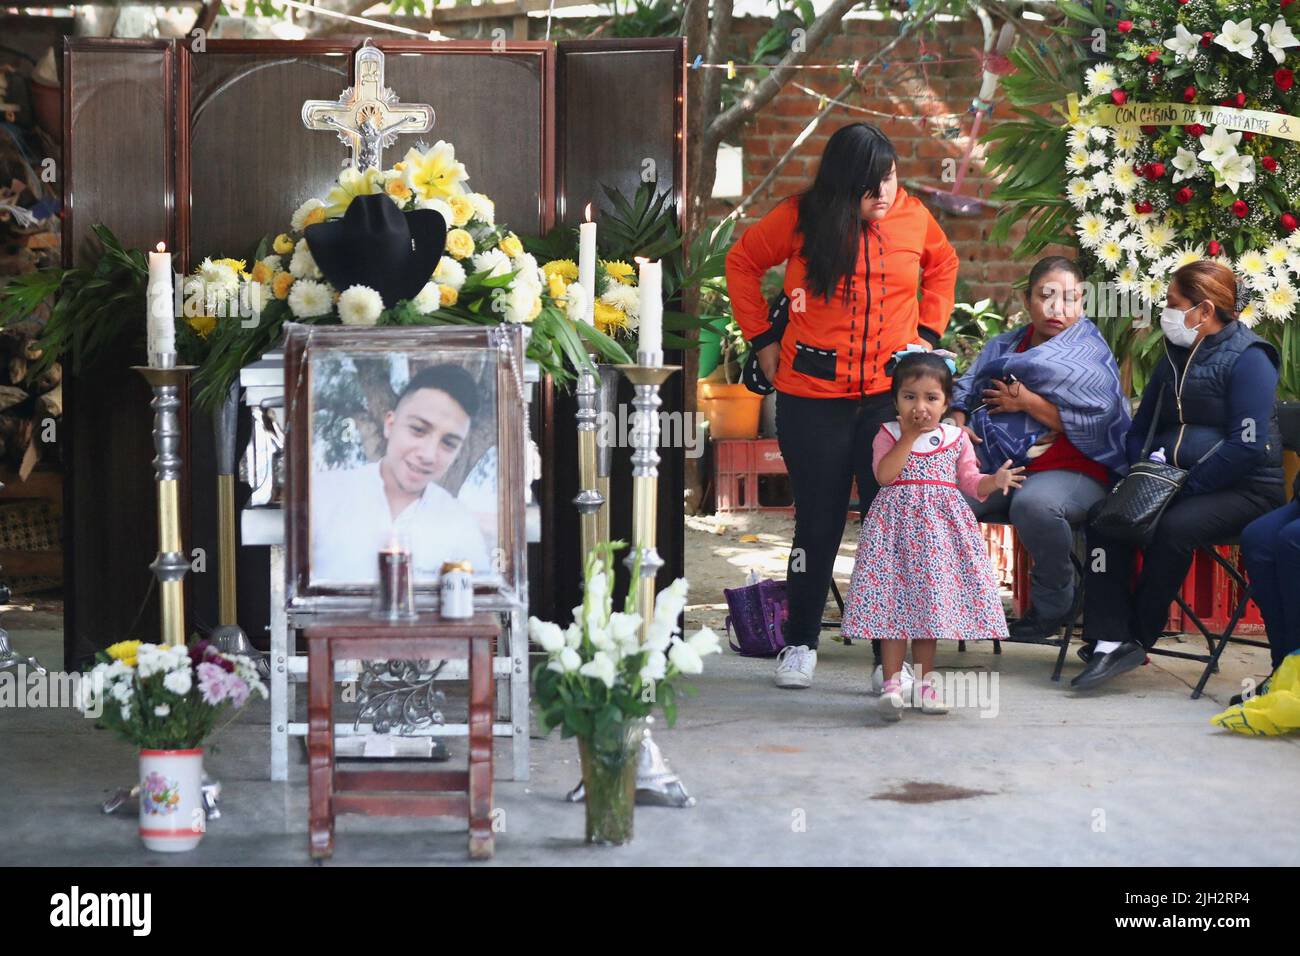 Relatives of late migrant Efrain Ferrel, 22, attend his wake, after being repatriated from San Antonio, Texas, U.S., at his family's home in Celaya, in Guanajuato state, Mexico July 14, 2022. REUTERS/Edgard Garrido Stock Photo